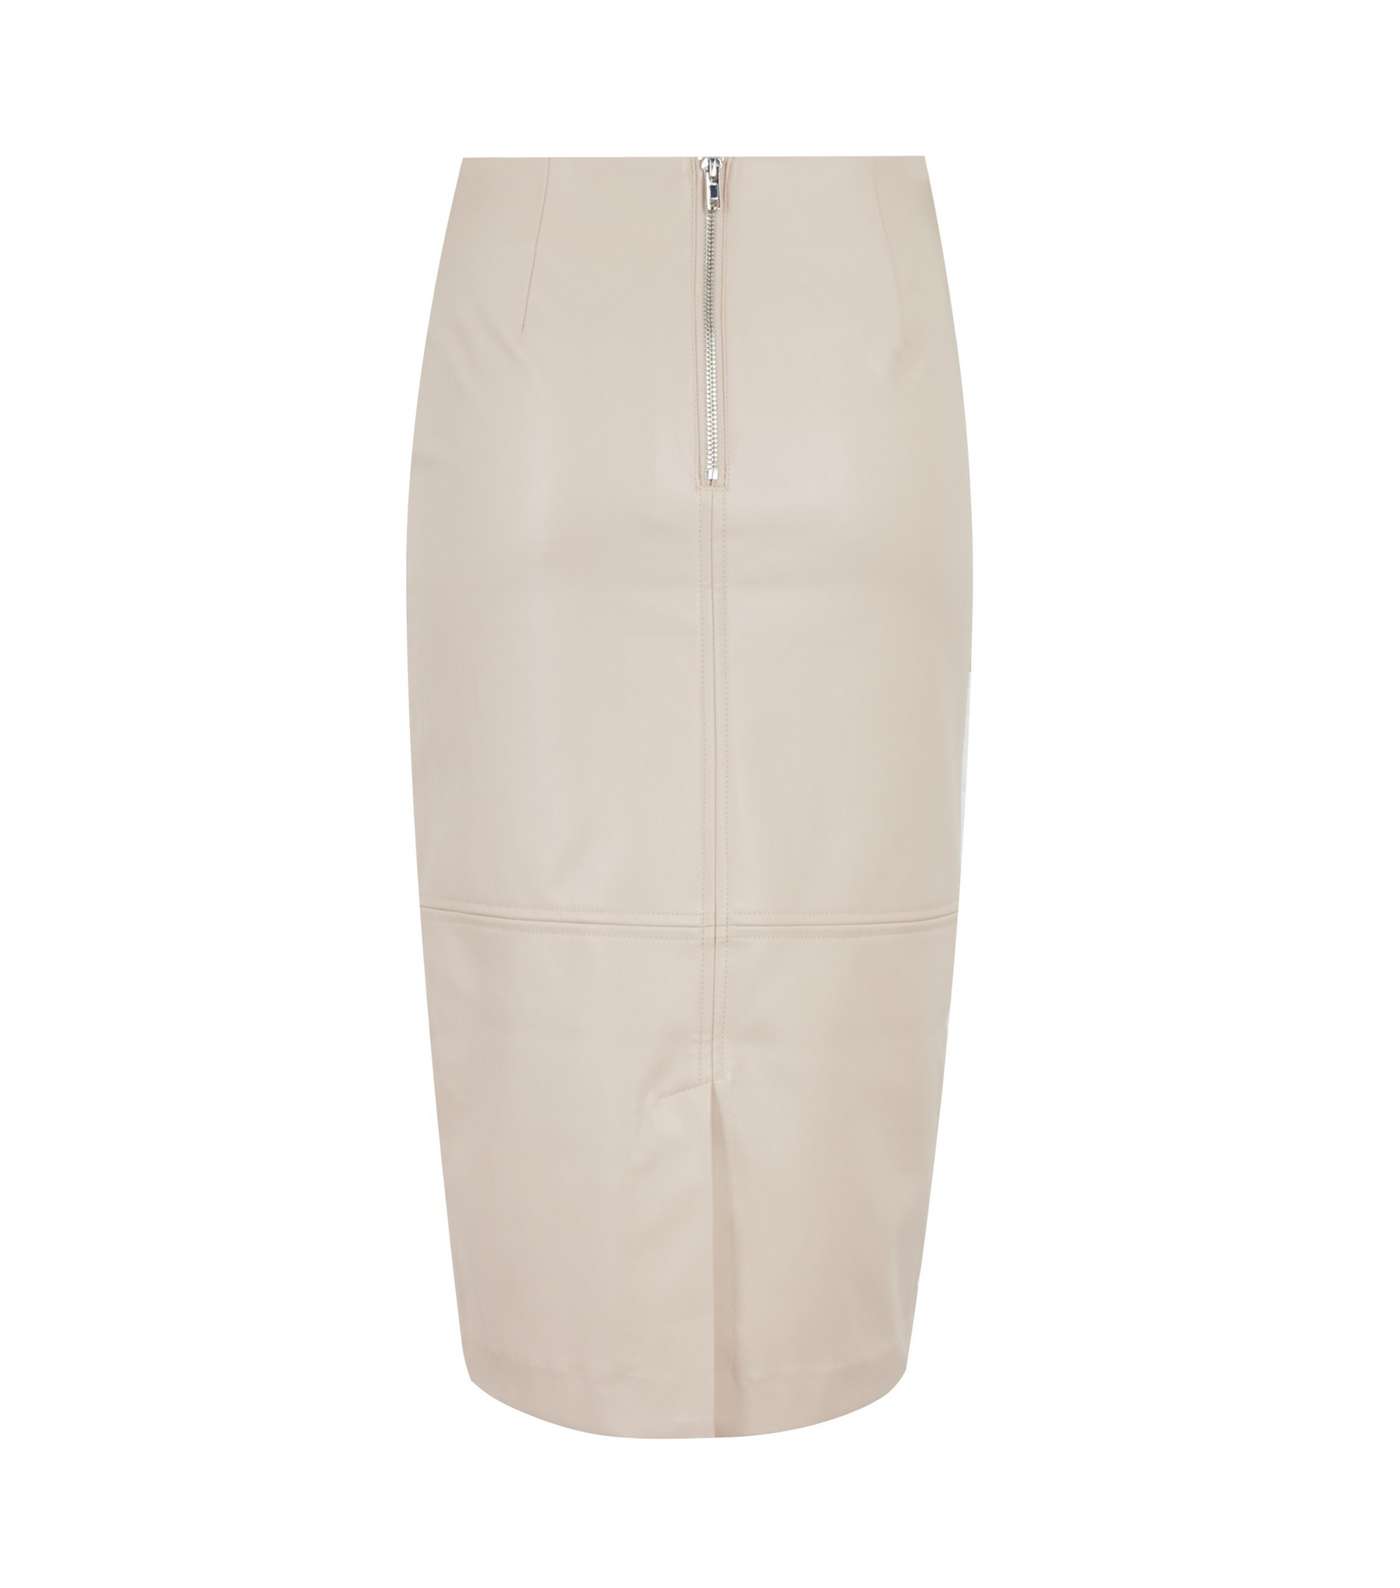 Off White Leather-Look Midi Pencil Skirt Image 2